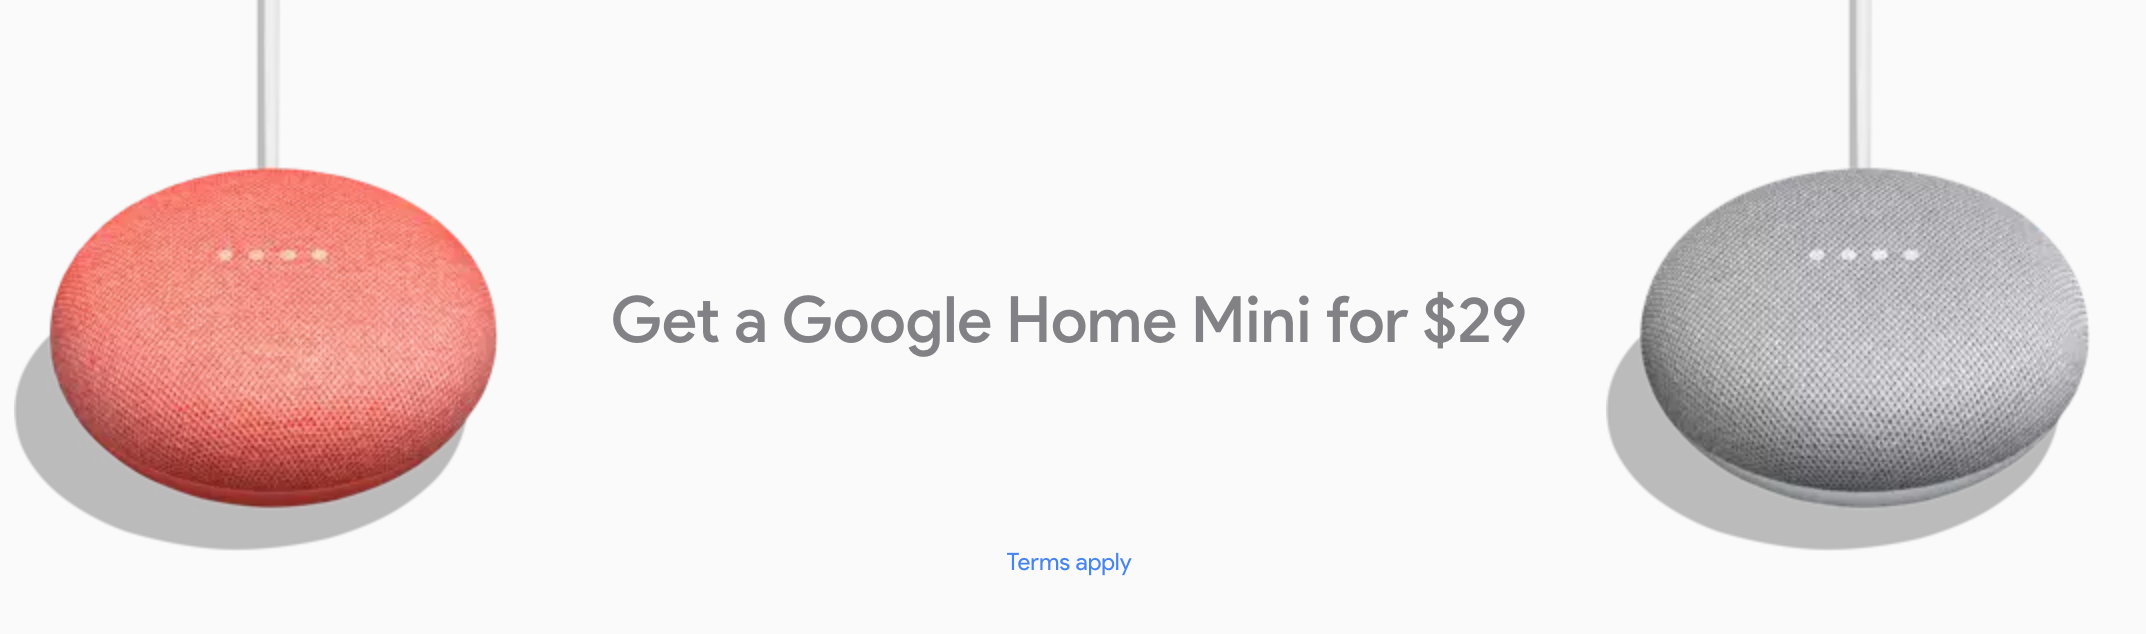 Google Home Mini Picture and Link